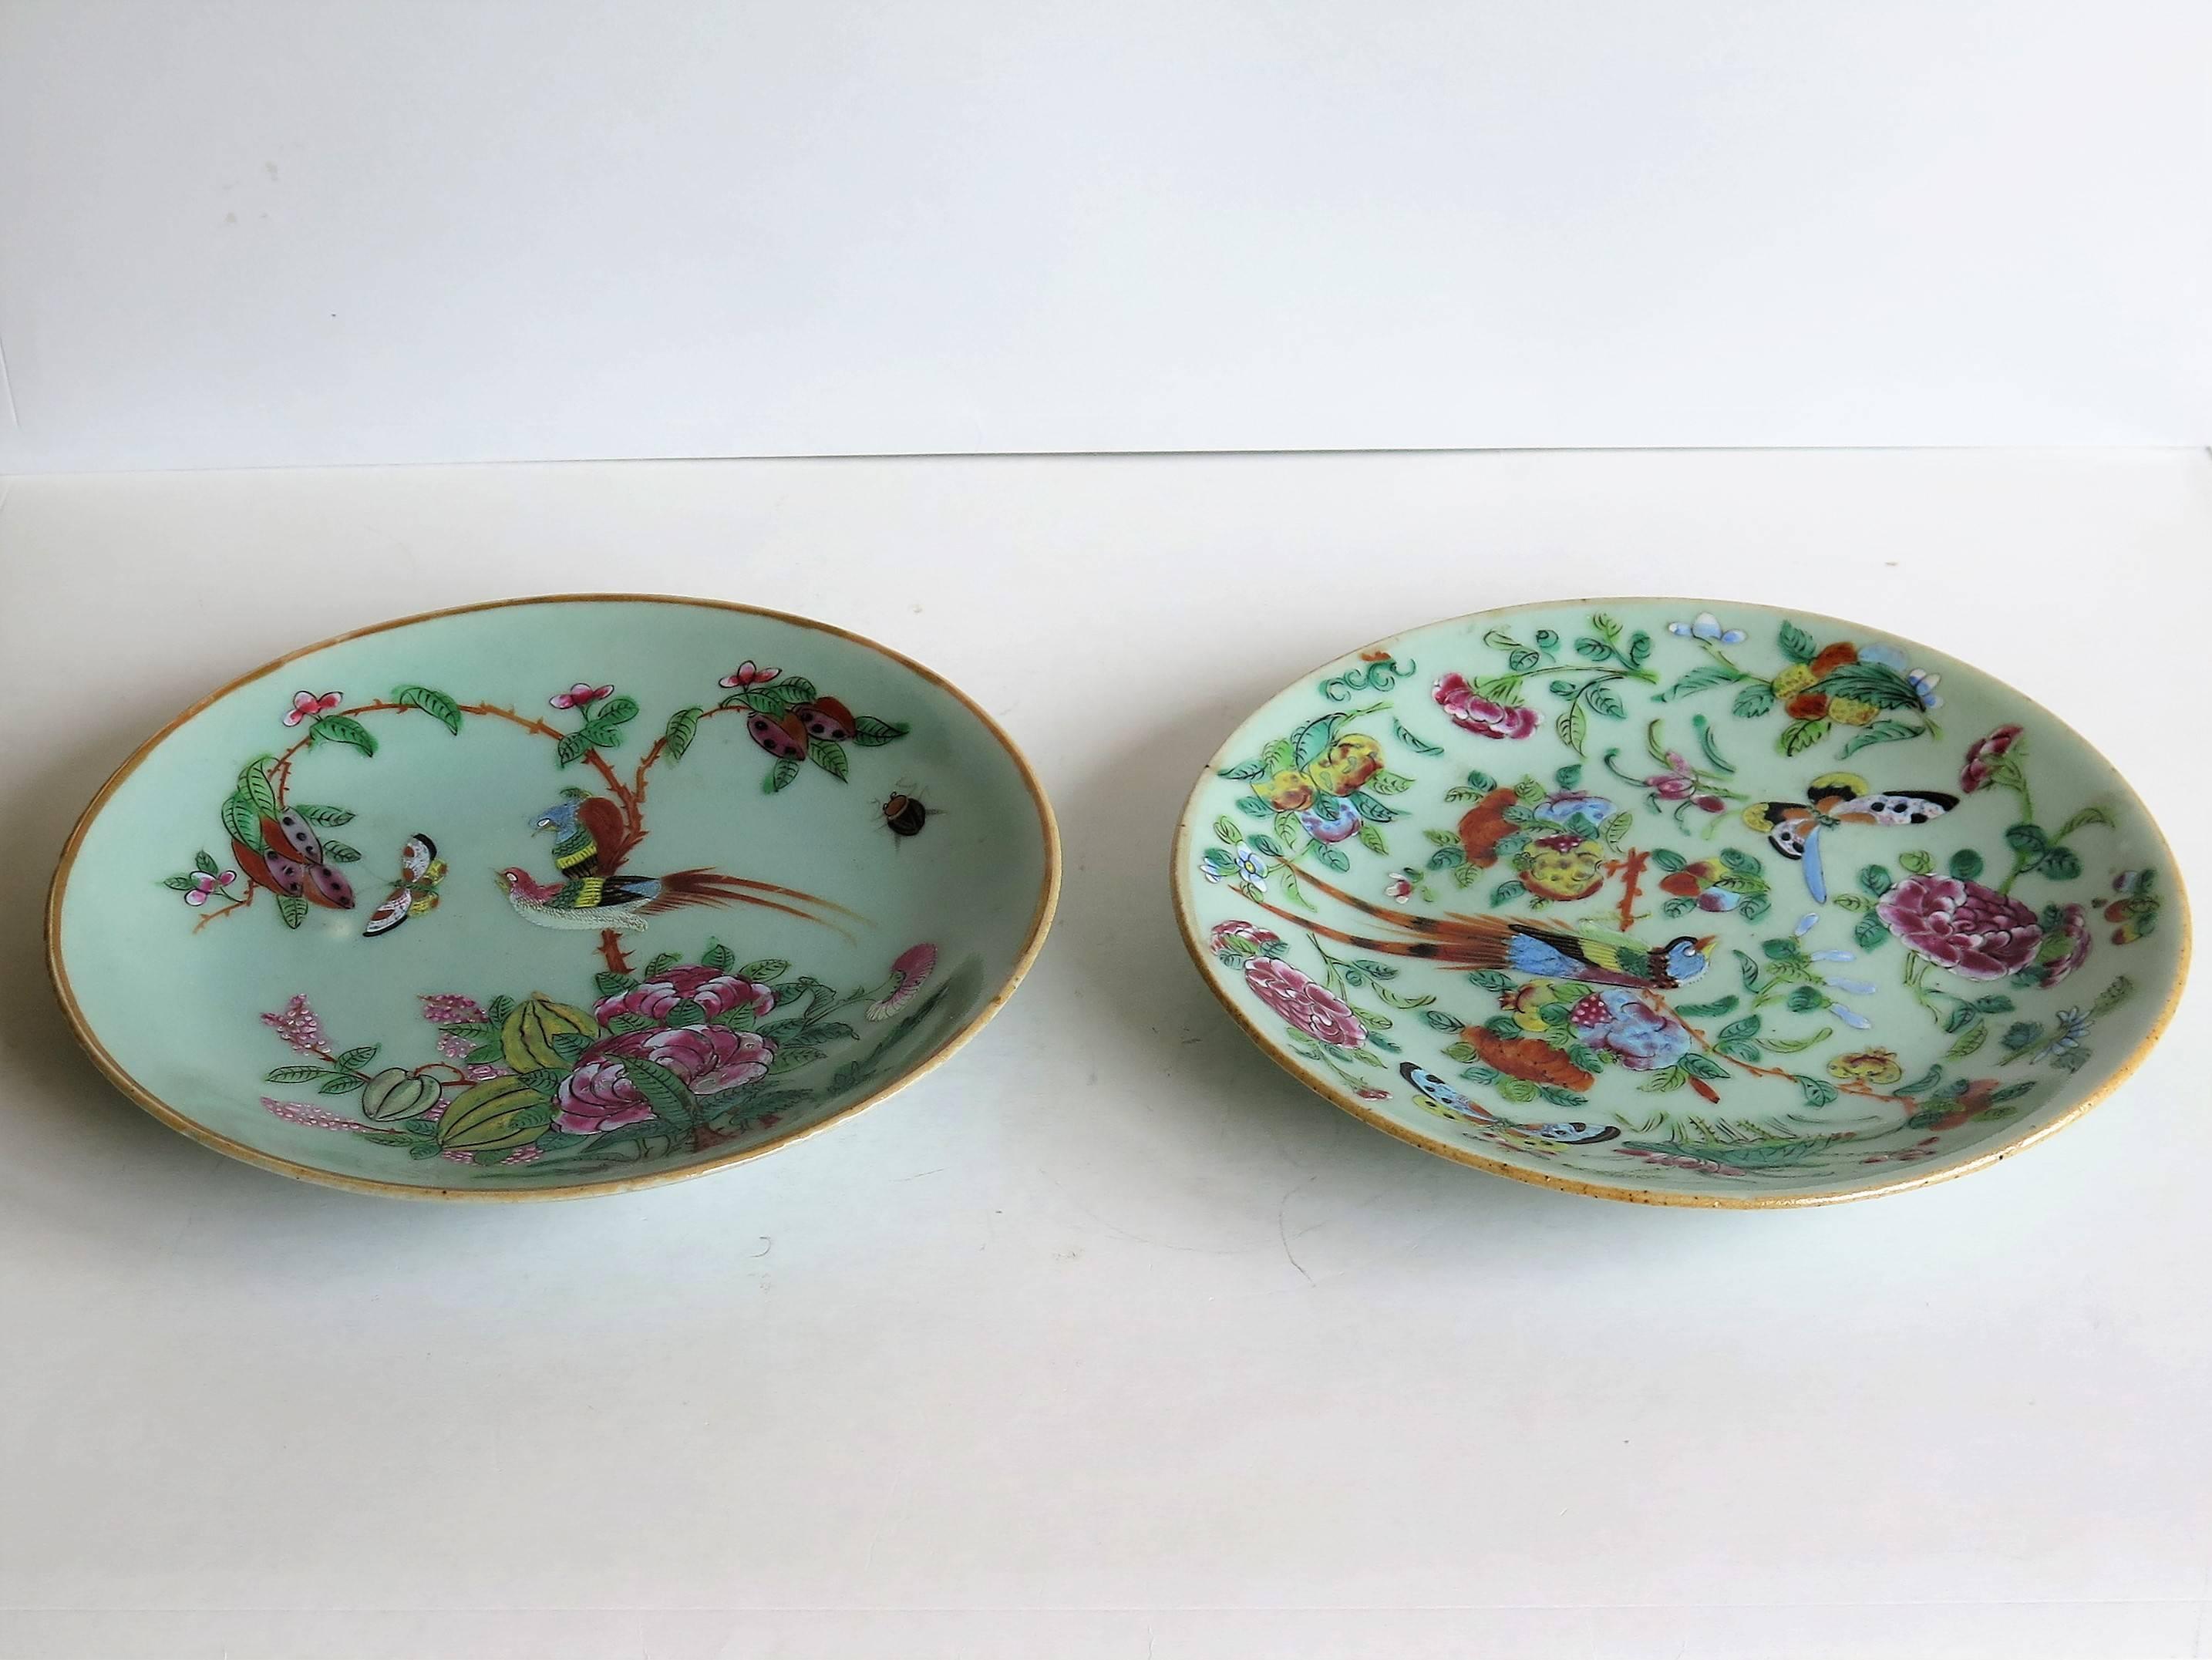 Two Chinese Plates, Porcelain, Celadon, Birds and Butterflies, Qing, circa 1830 1